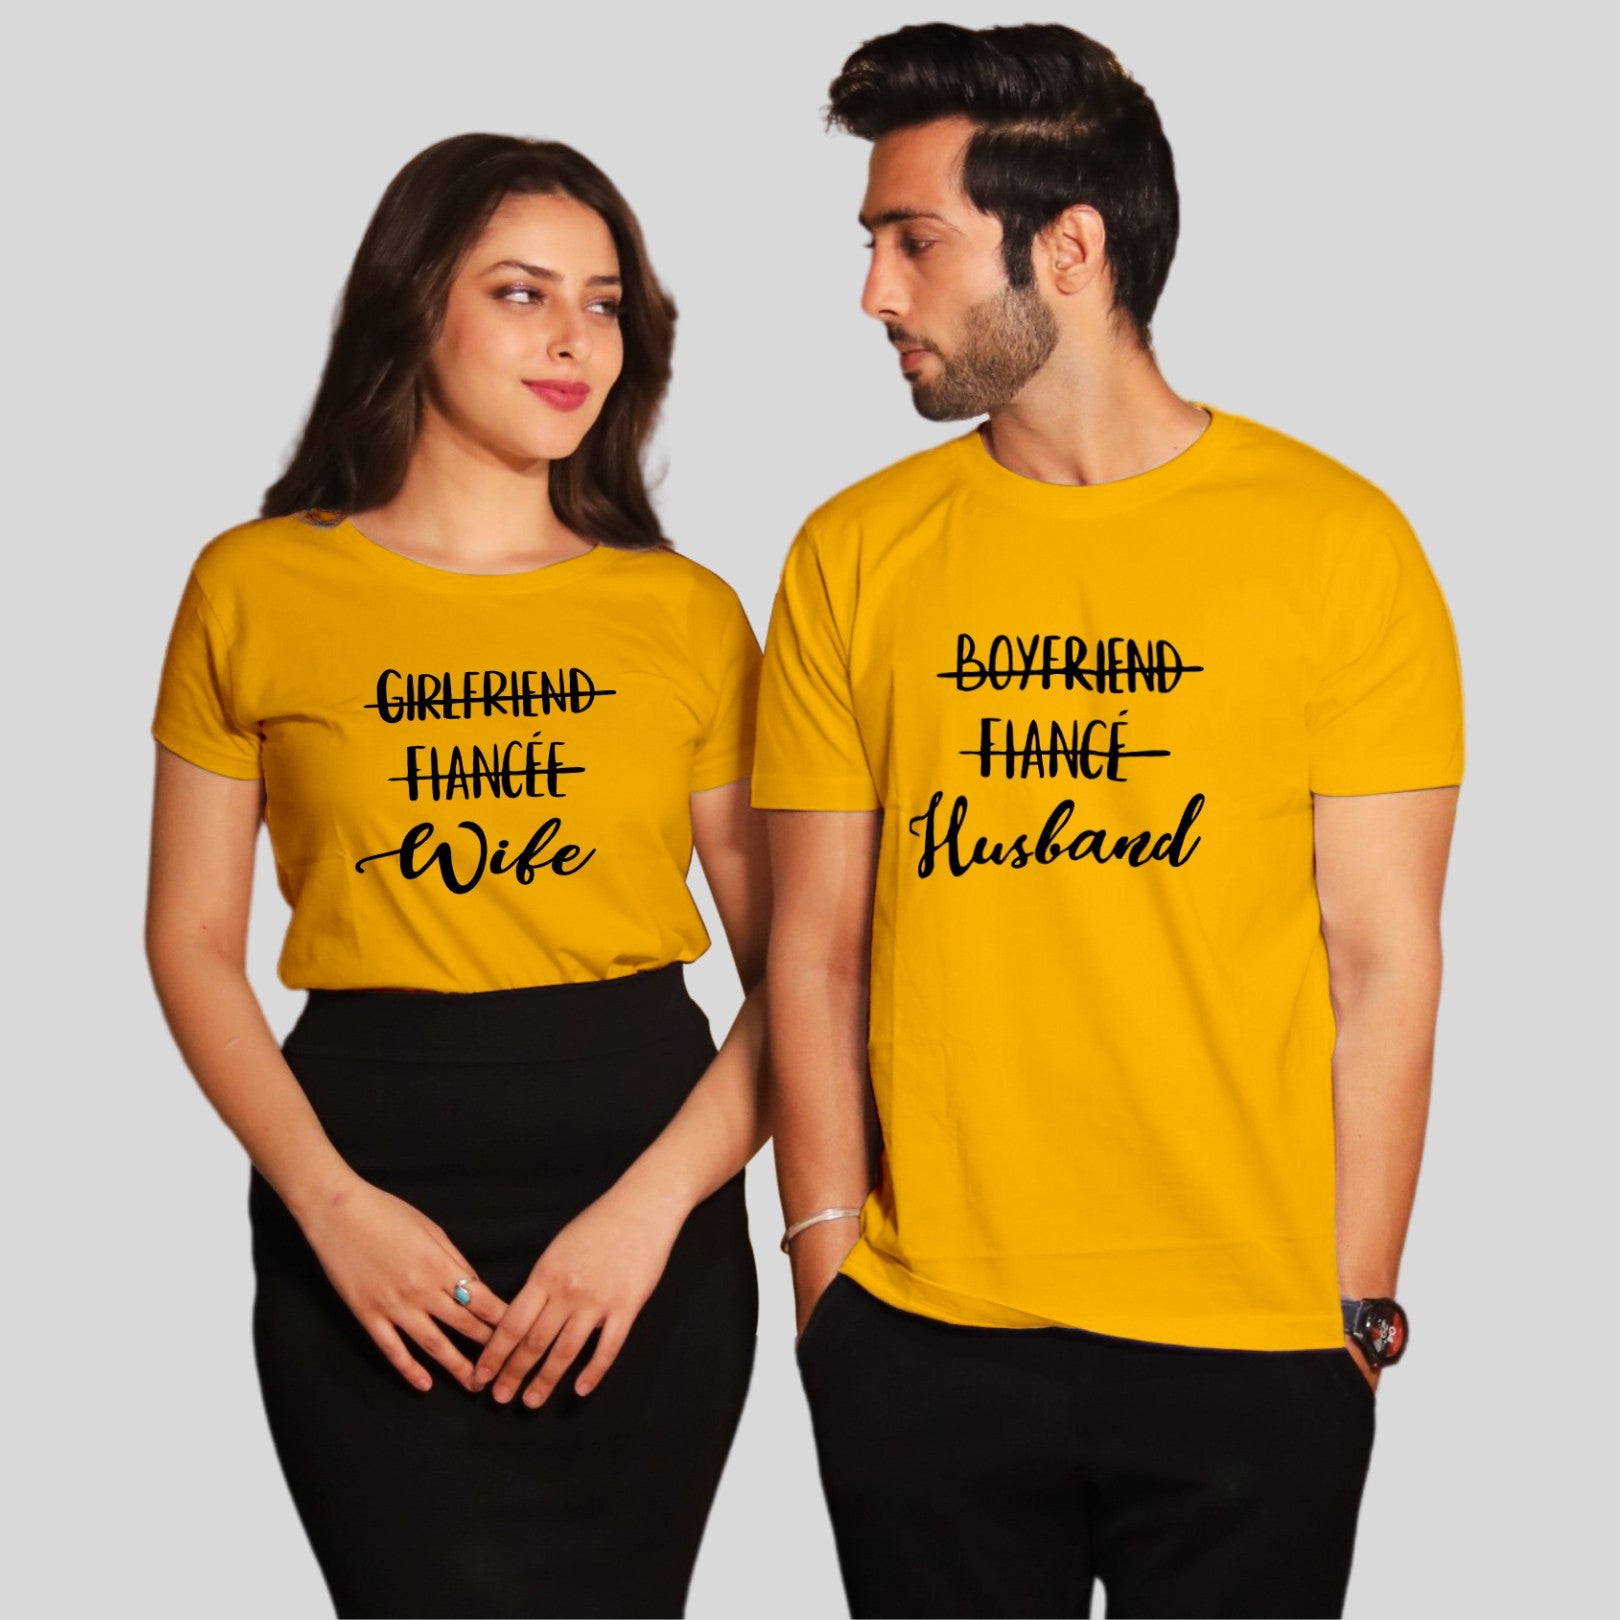 Couple T Shirt for Husband Wife In Yellow Colour - GF Fiance Wife BF Fiance Husband Variant